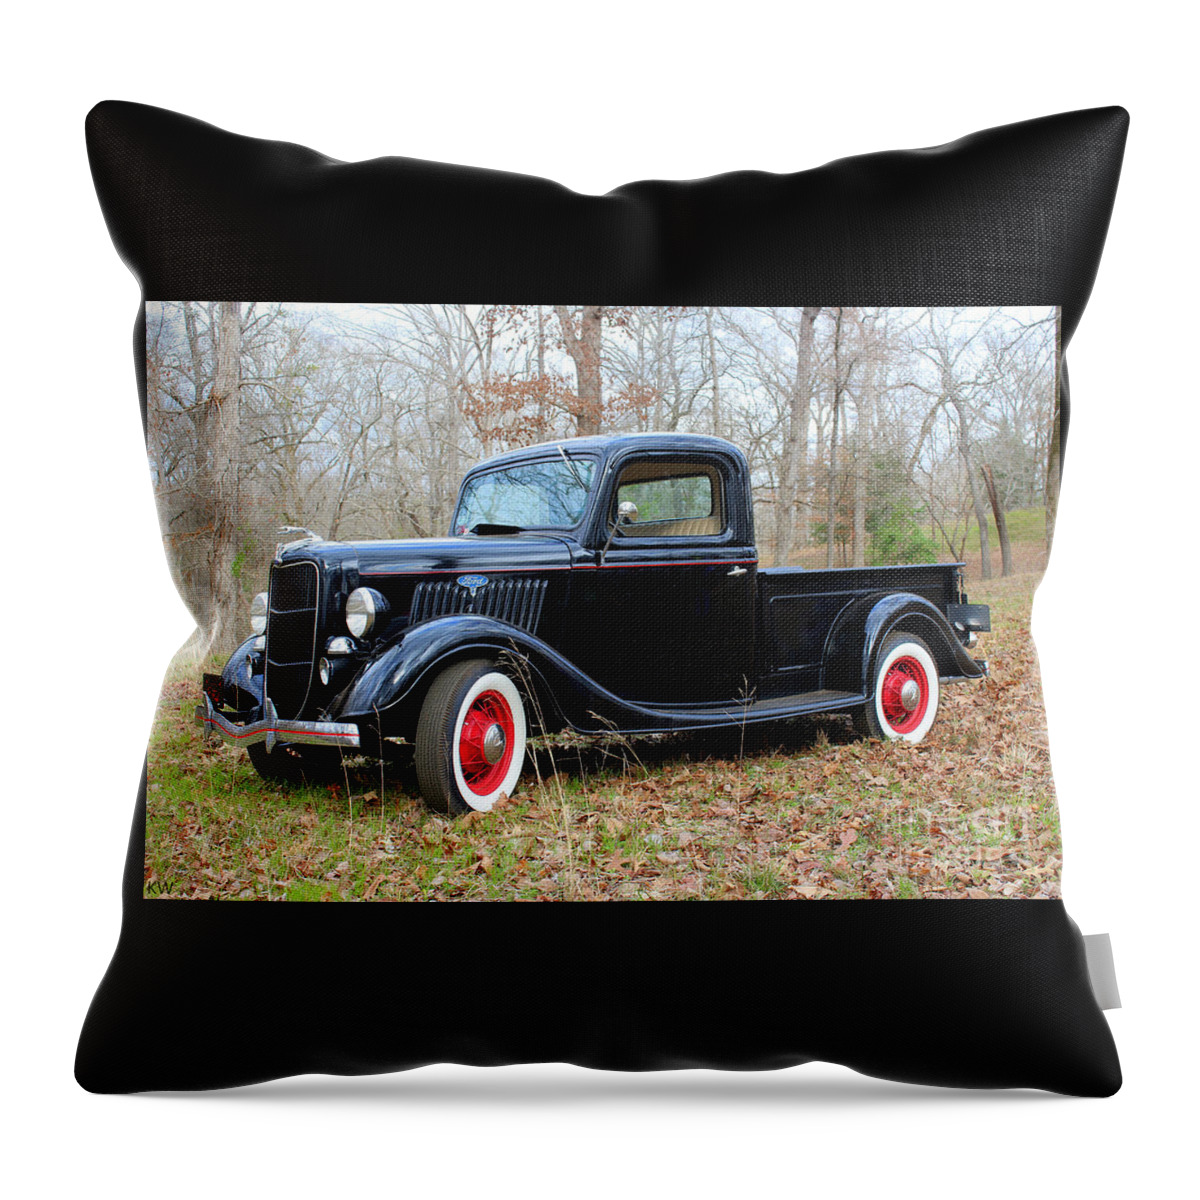 1935 Ford Pickup Throw Pillow featuring the photograph The 1935 Ford Pickup by Kathy White